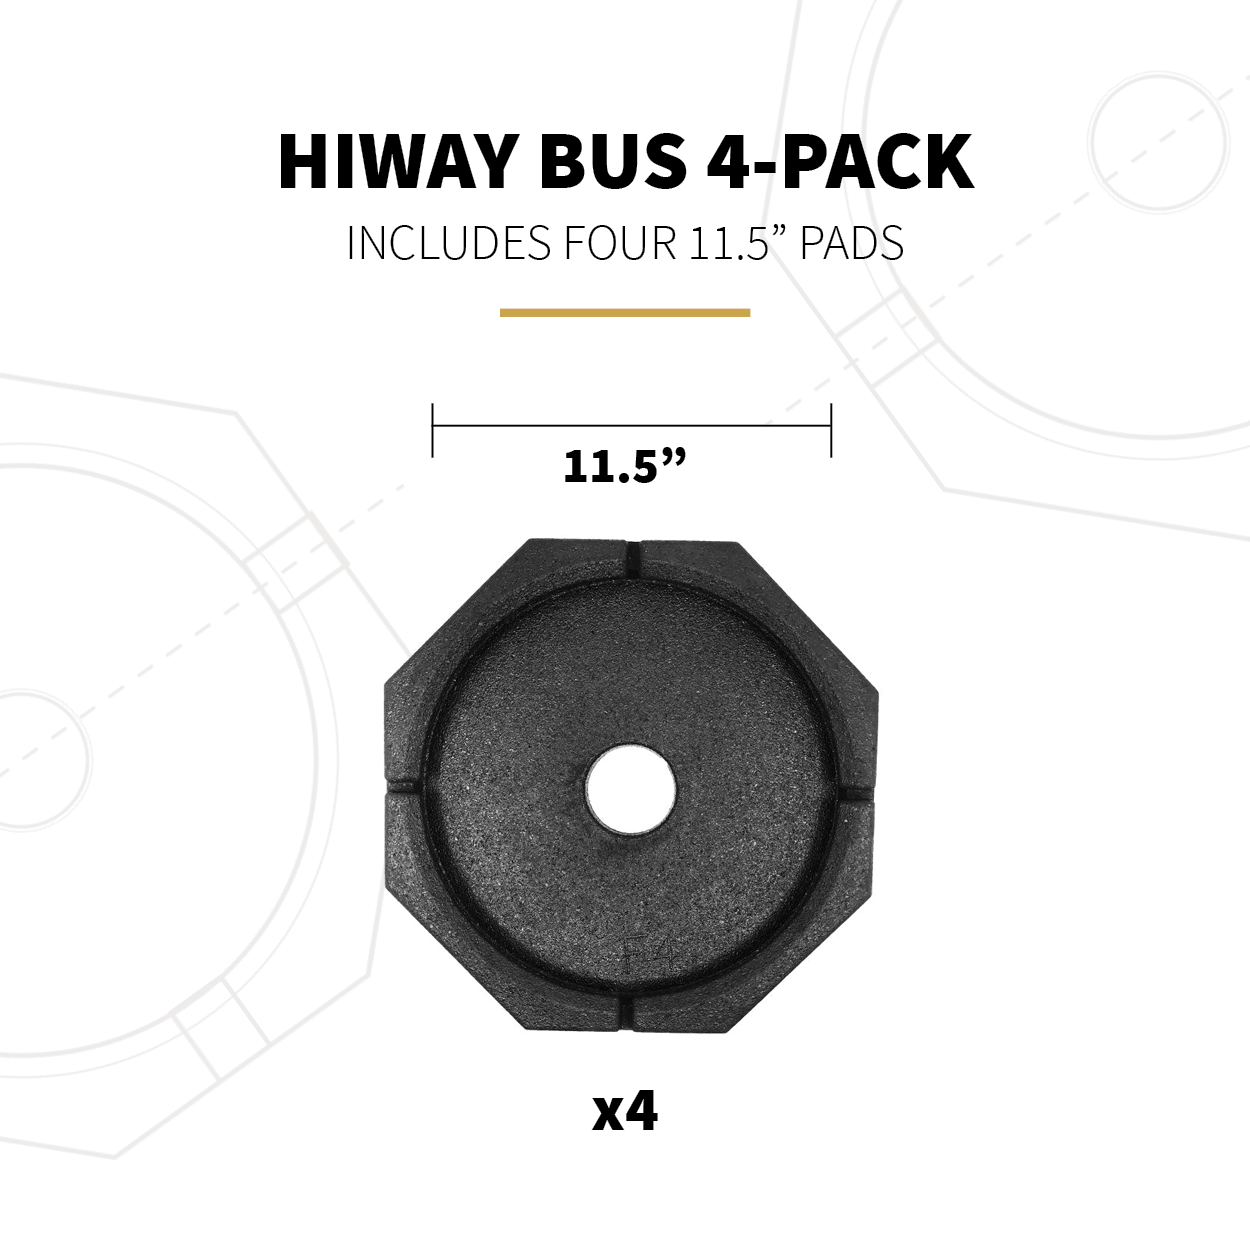 HiWay Bus 4-Pack Specs